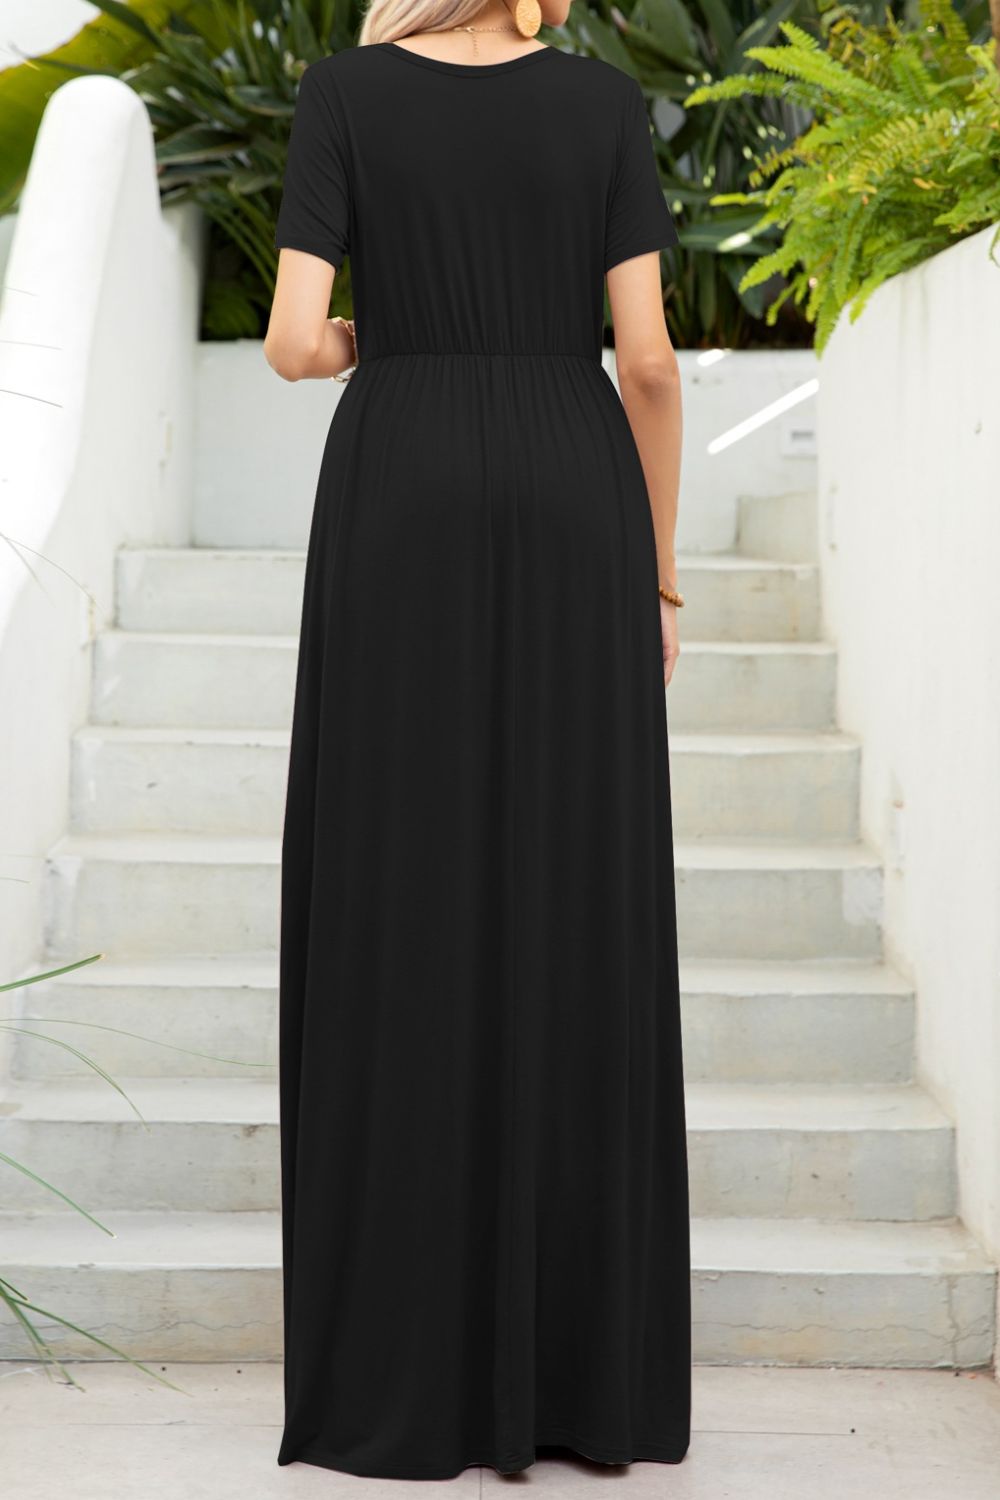 Elegance Round Neck Maxi Tee Dress with Pockets in Forest, Navy, Wine and Black